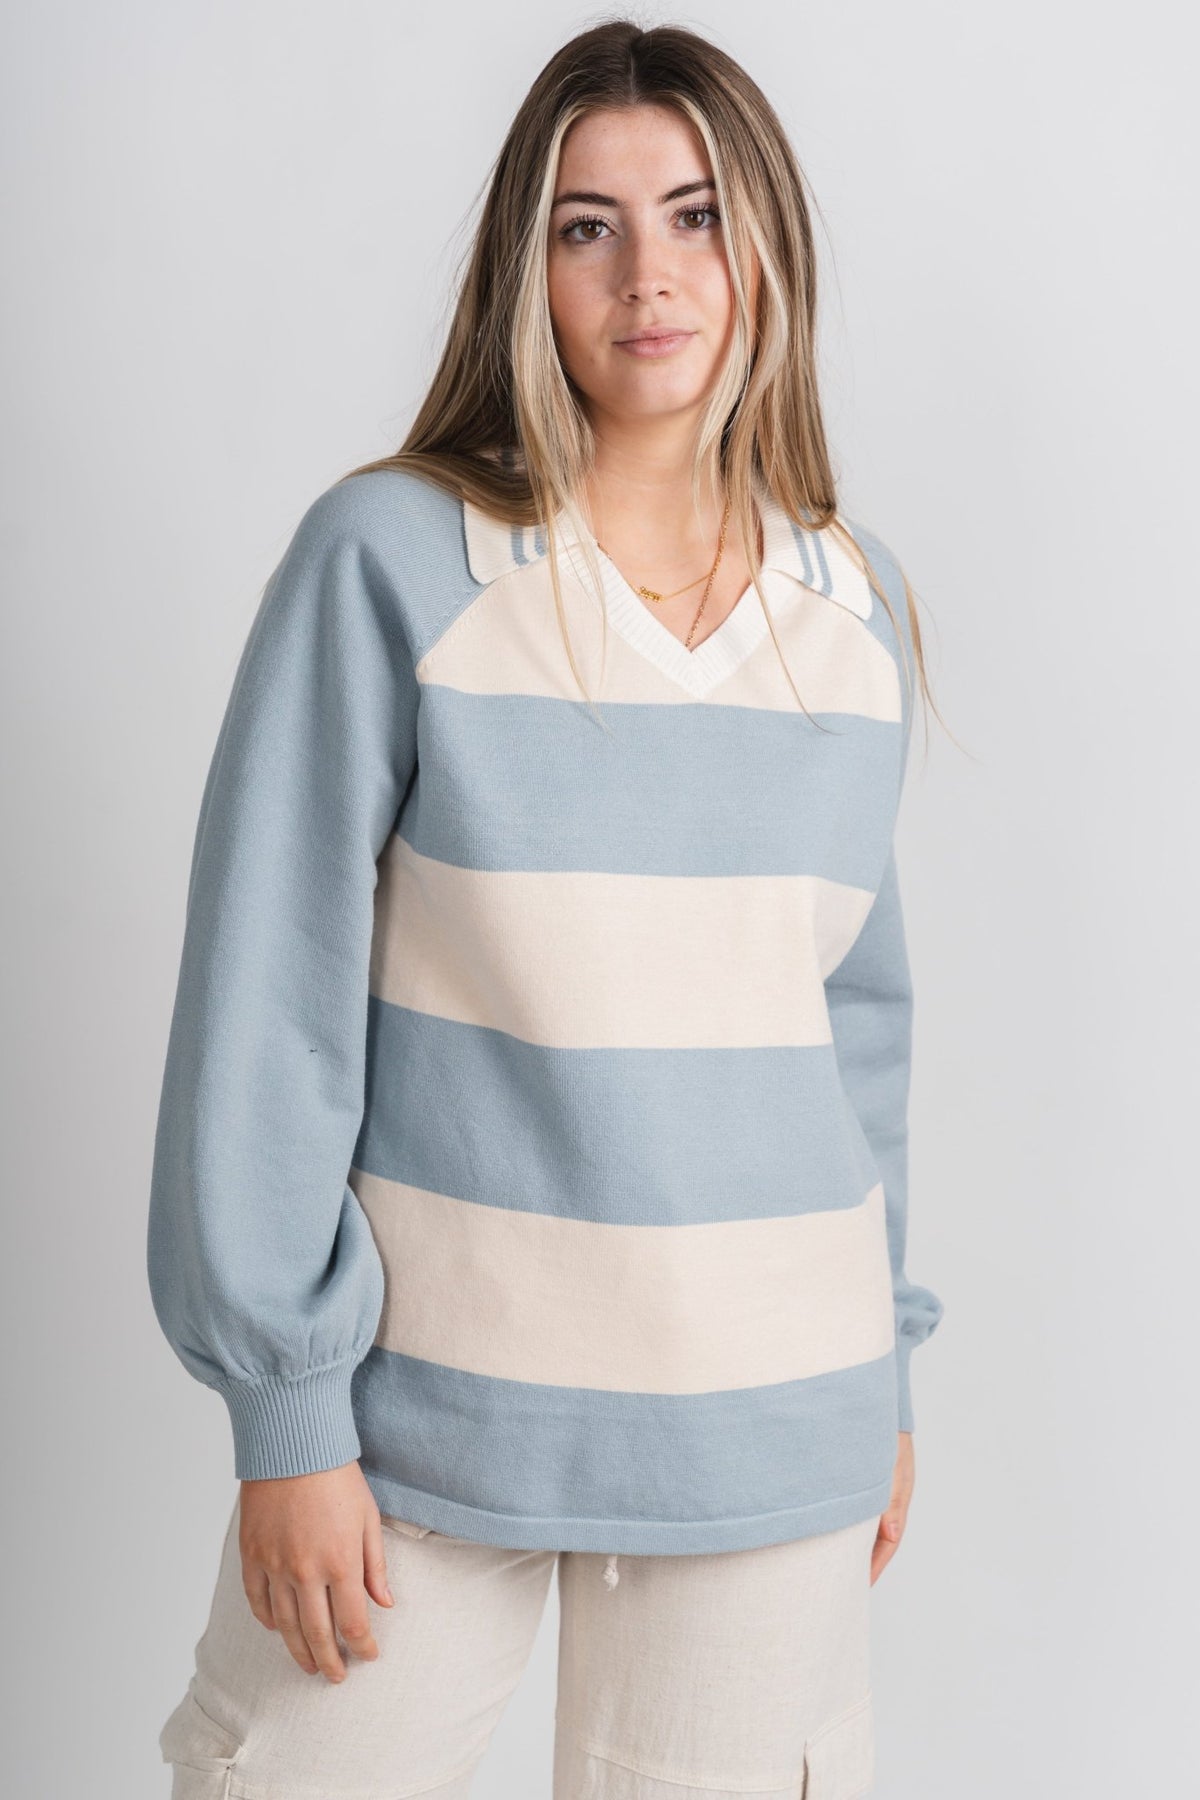 Striped varsity sweater cream/light blue – Boutique Sweaters | Fashionable Sweaters at Lush Fashion Lounge Boutique in Oklahoma City